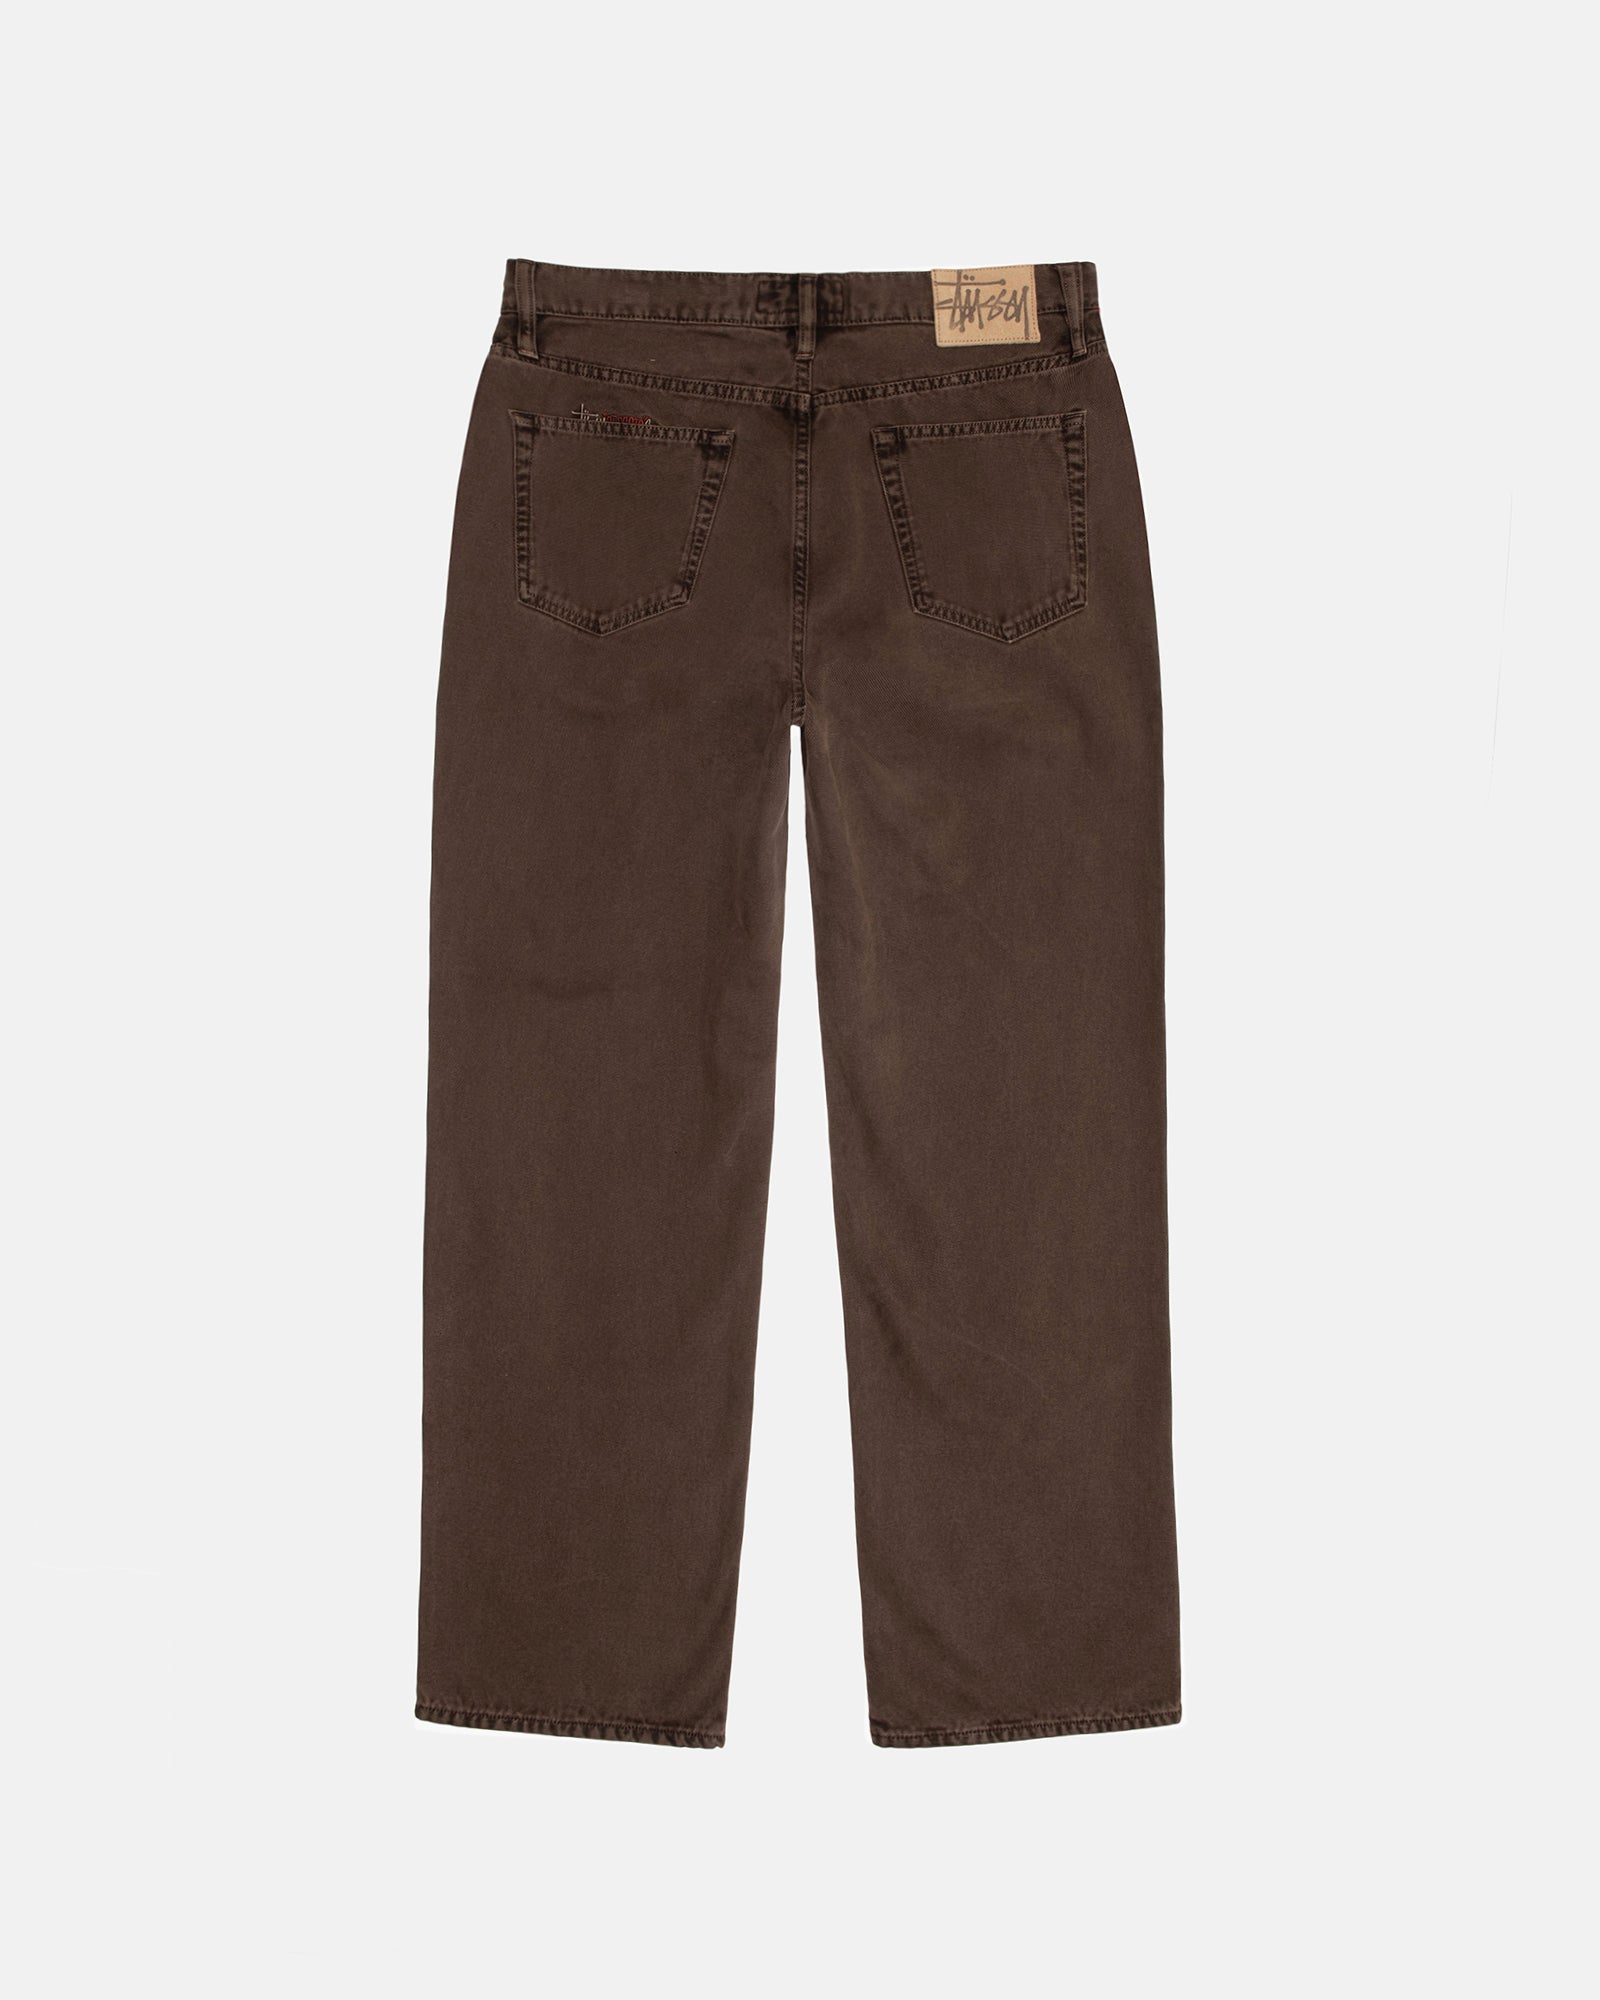 Stüssy Classic Jean Washed Canvas Brown Pants